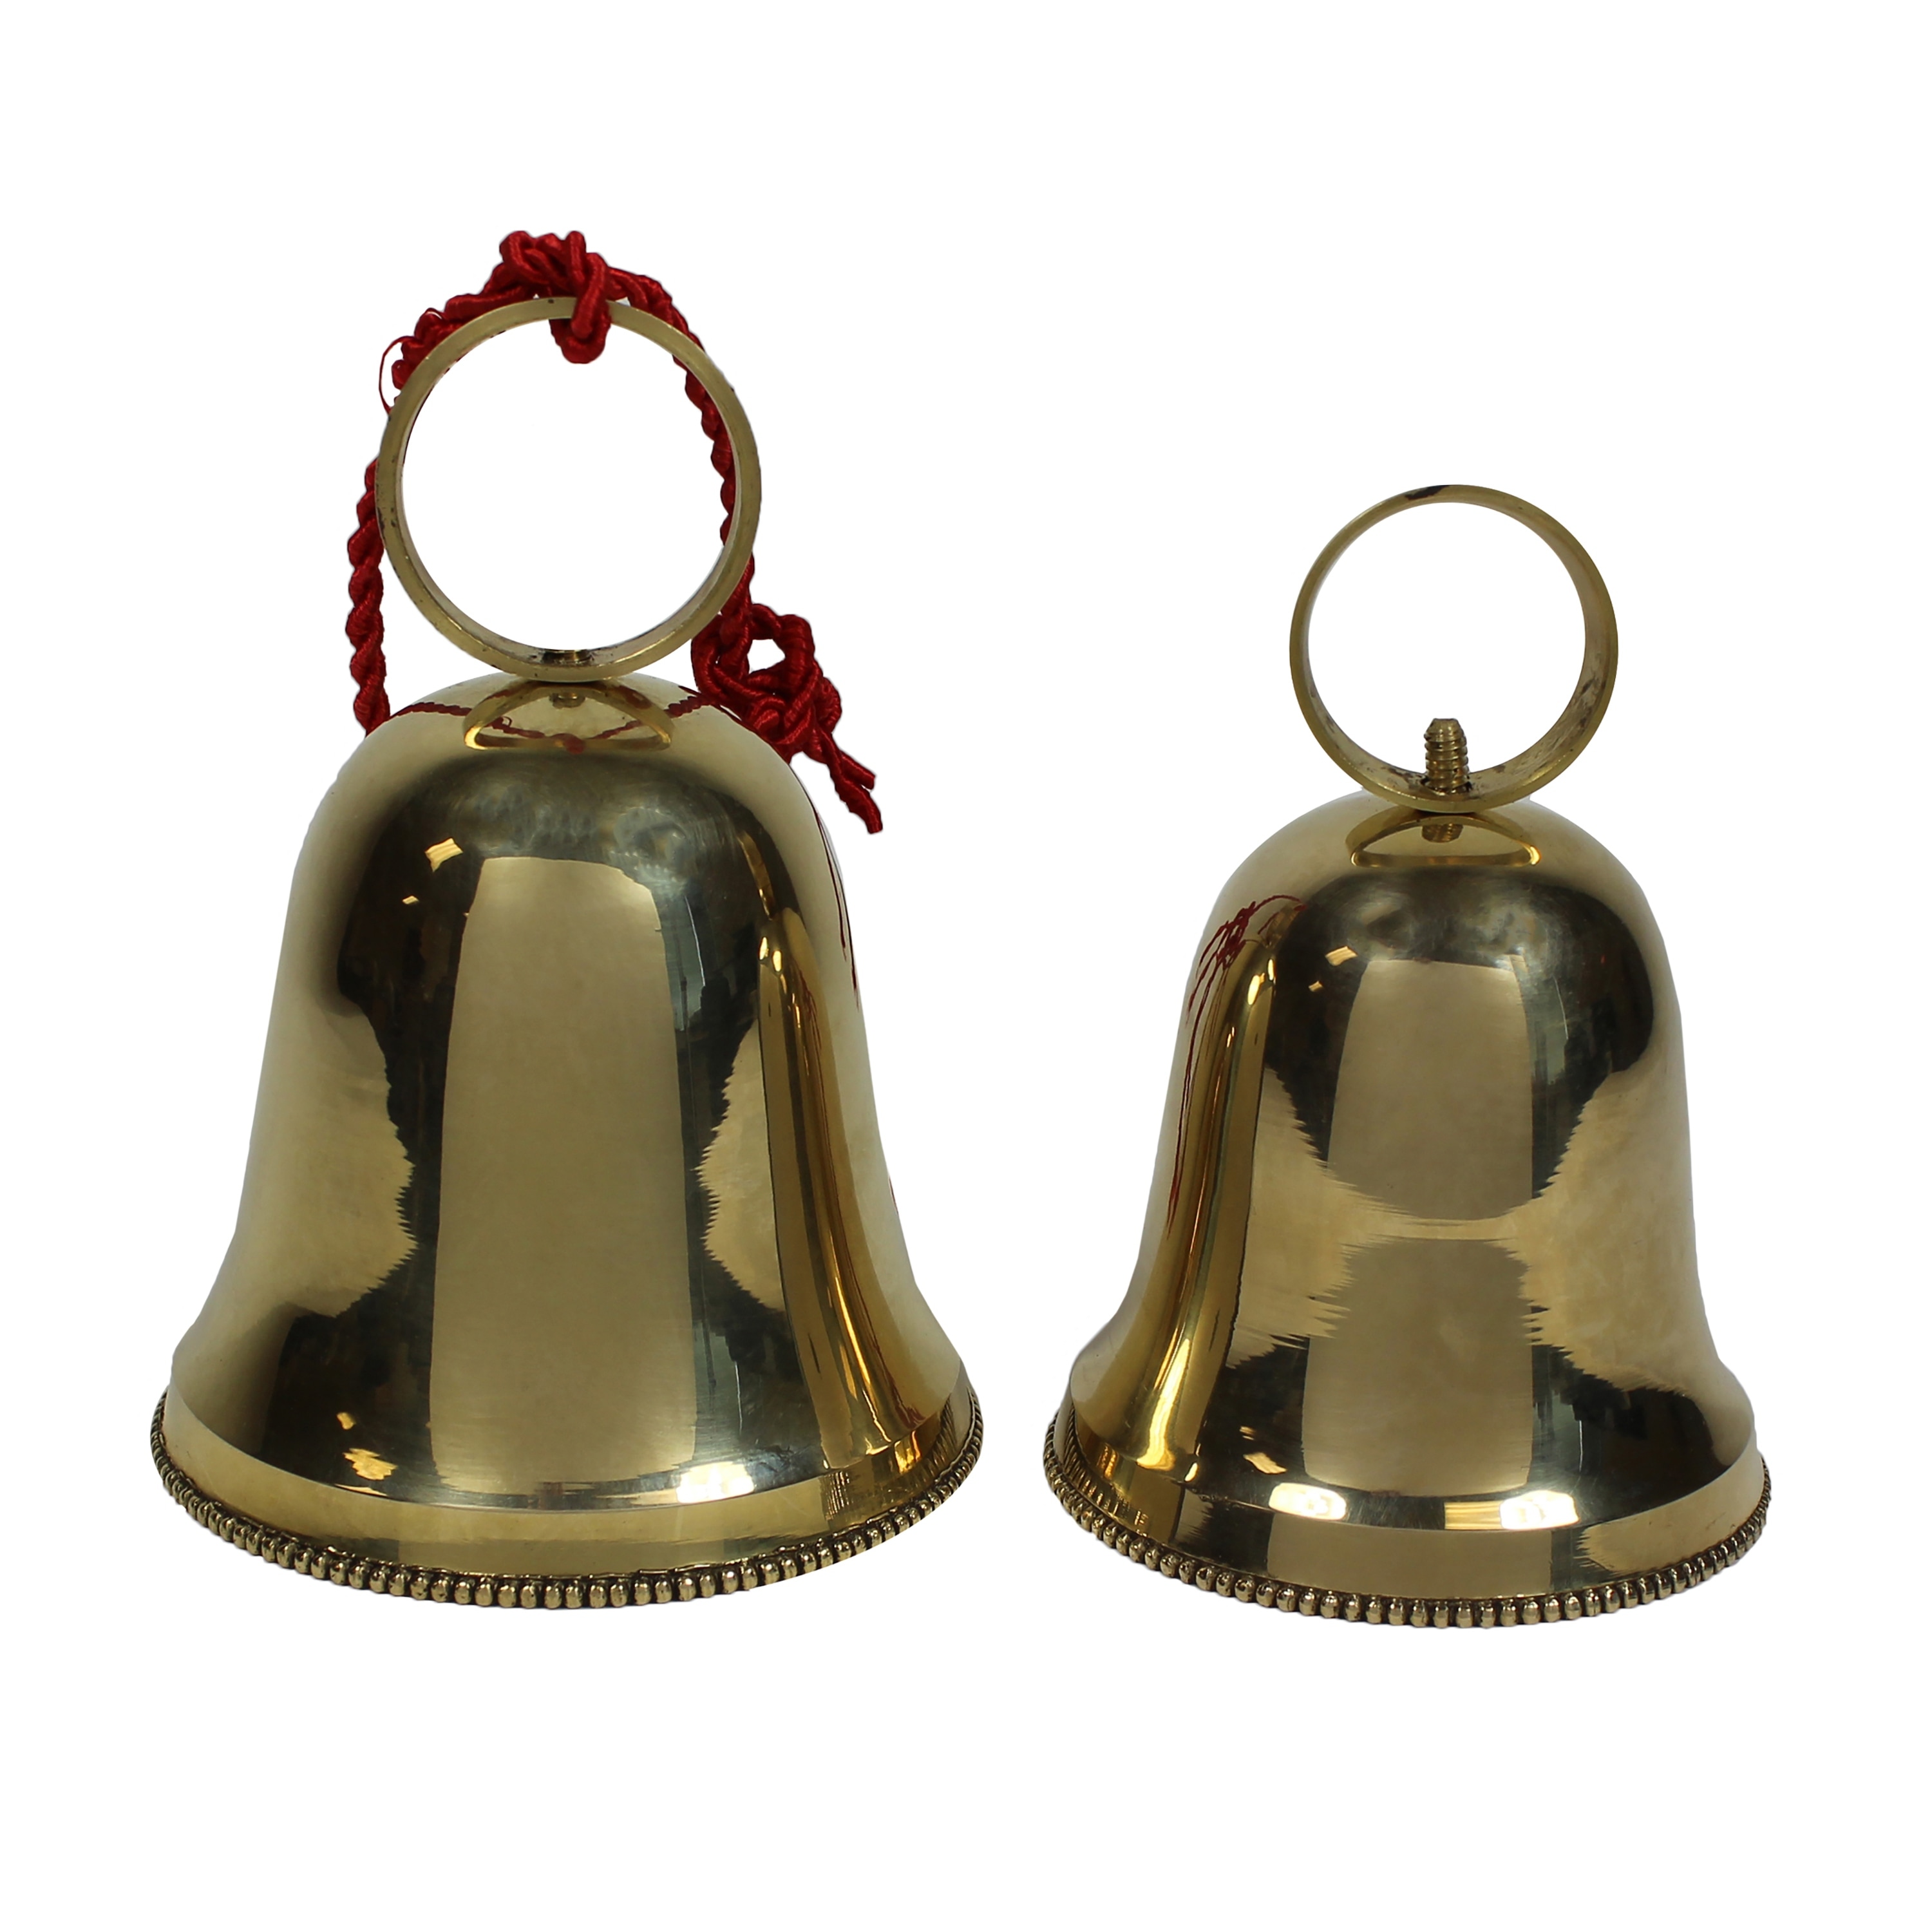 Beautifully Cast Solid Brass Desk Bell 5" x 3.25"  Imported  New 